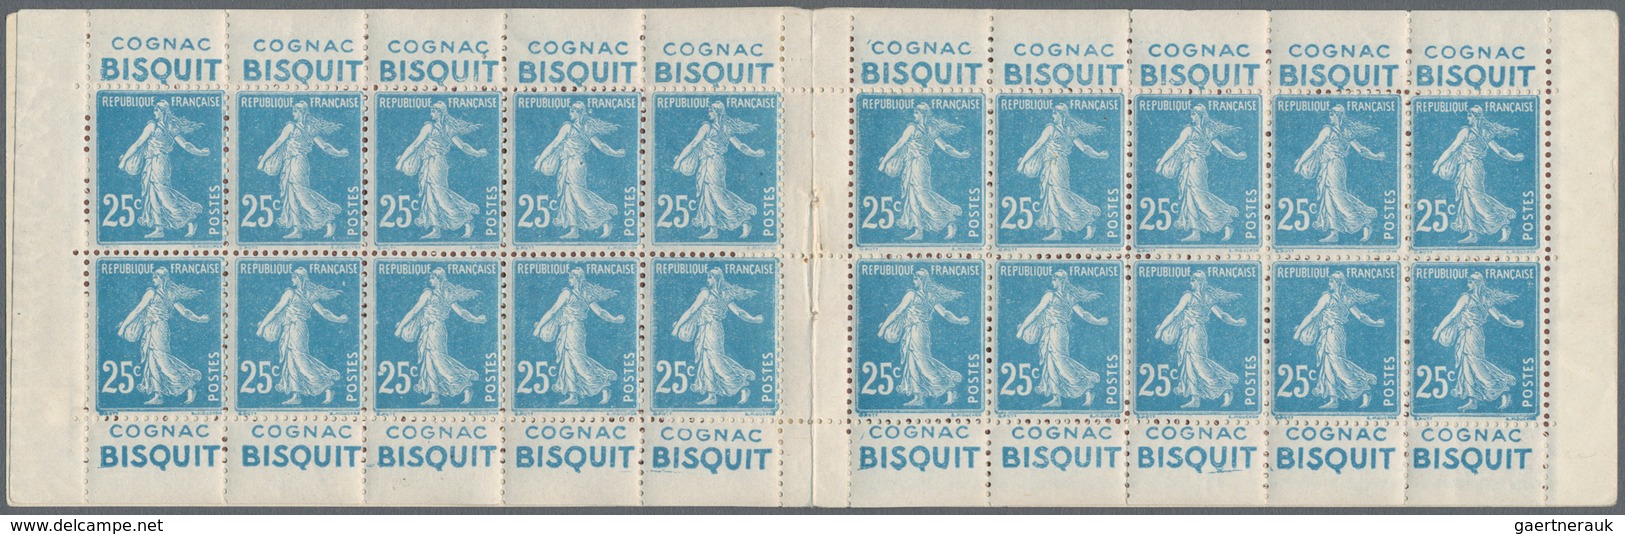 Thematik: Verkehr-Auto / Traffic-car: 1922 (approx), France. Unclamped Stamp Booklet "Bisquit 4 Fois - Auto's